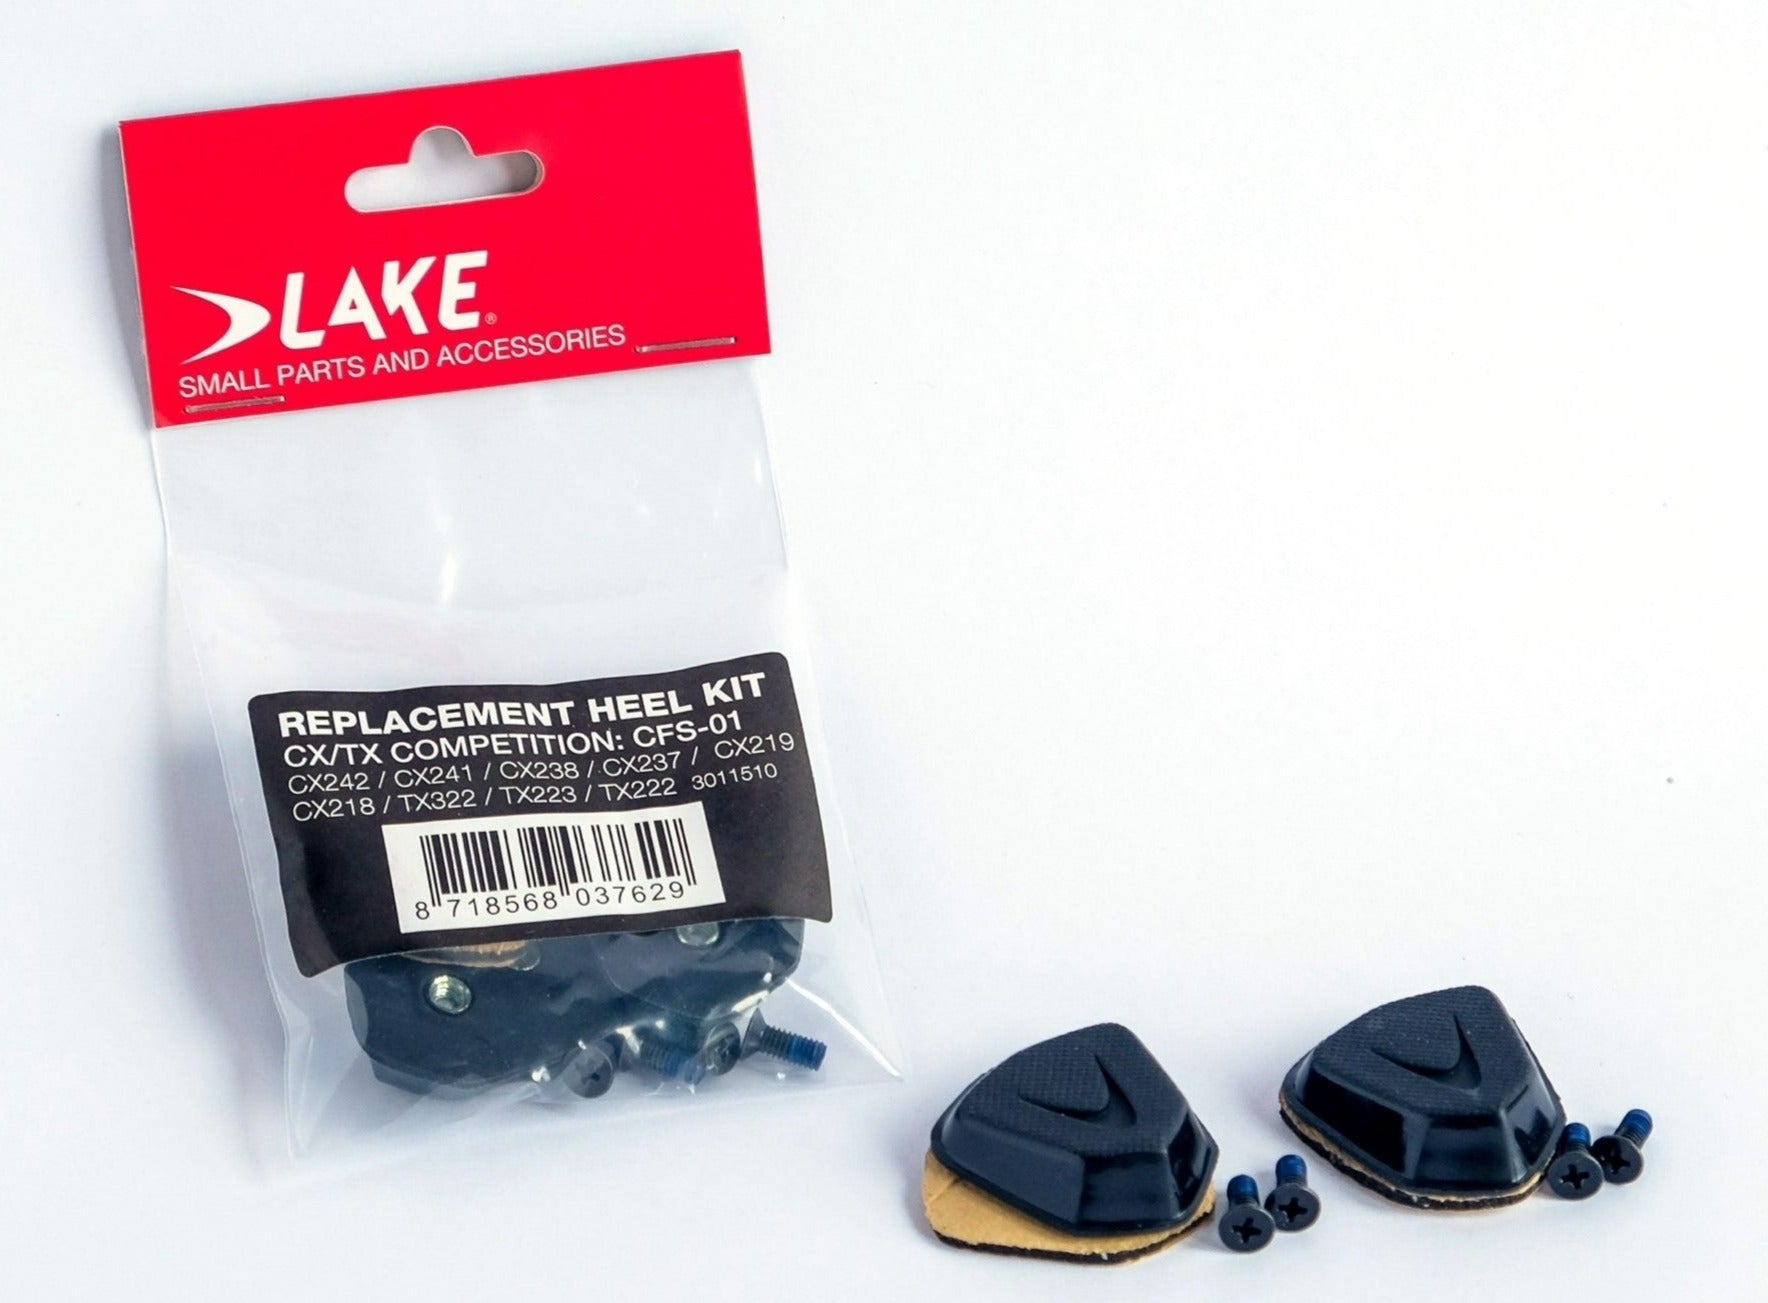 vecino En contra viva COMPETITION LAST REPLACEMENT HEEL PAD KIT – Lake Cycling